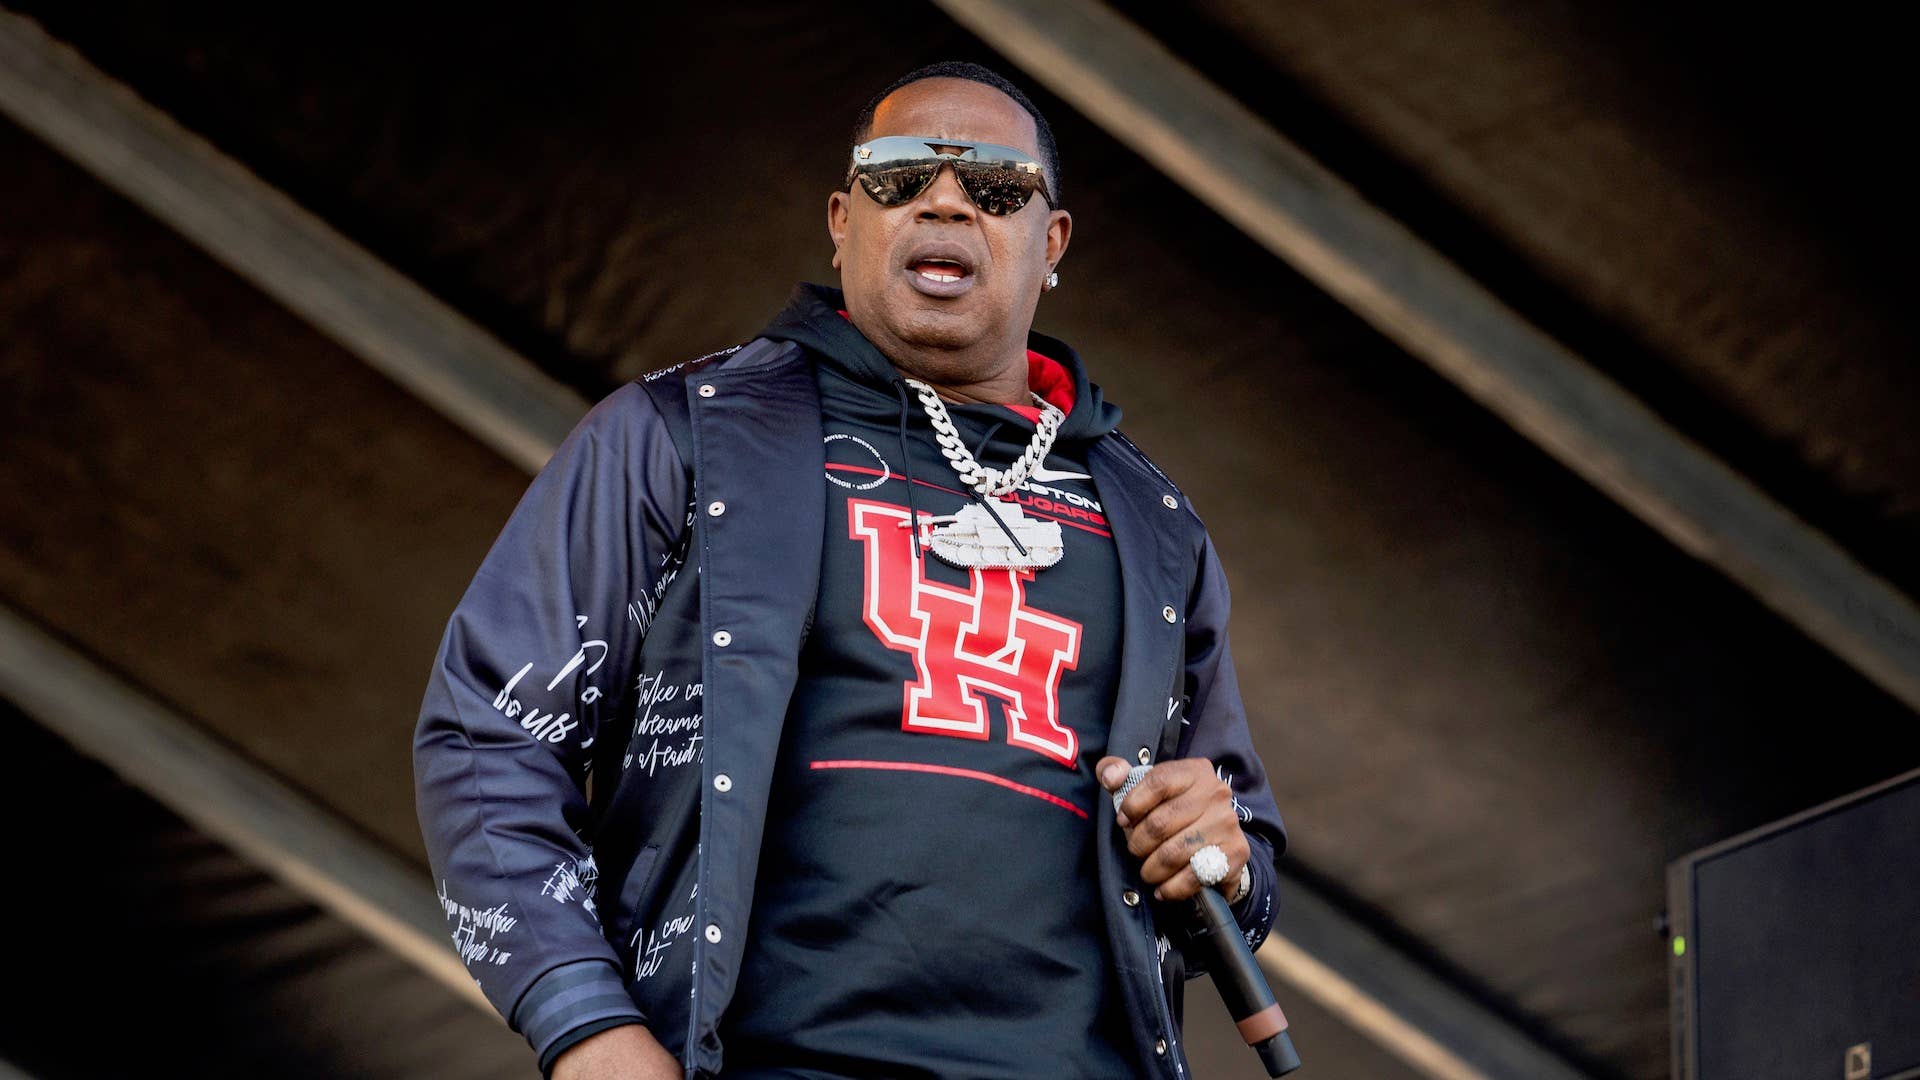 Master P performs during 2021 Astroworld Festival at NRG Park